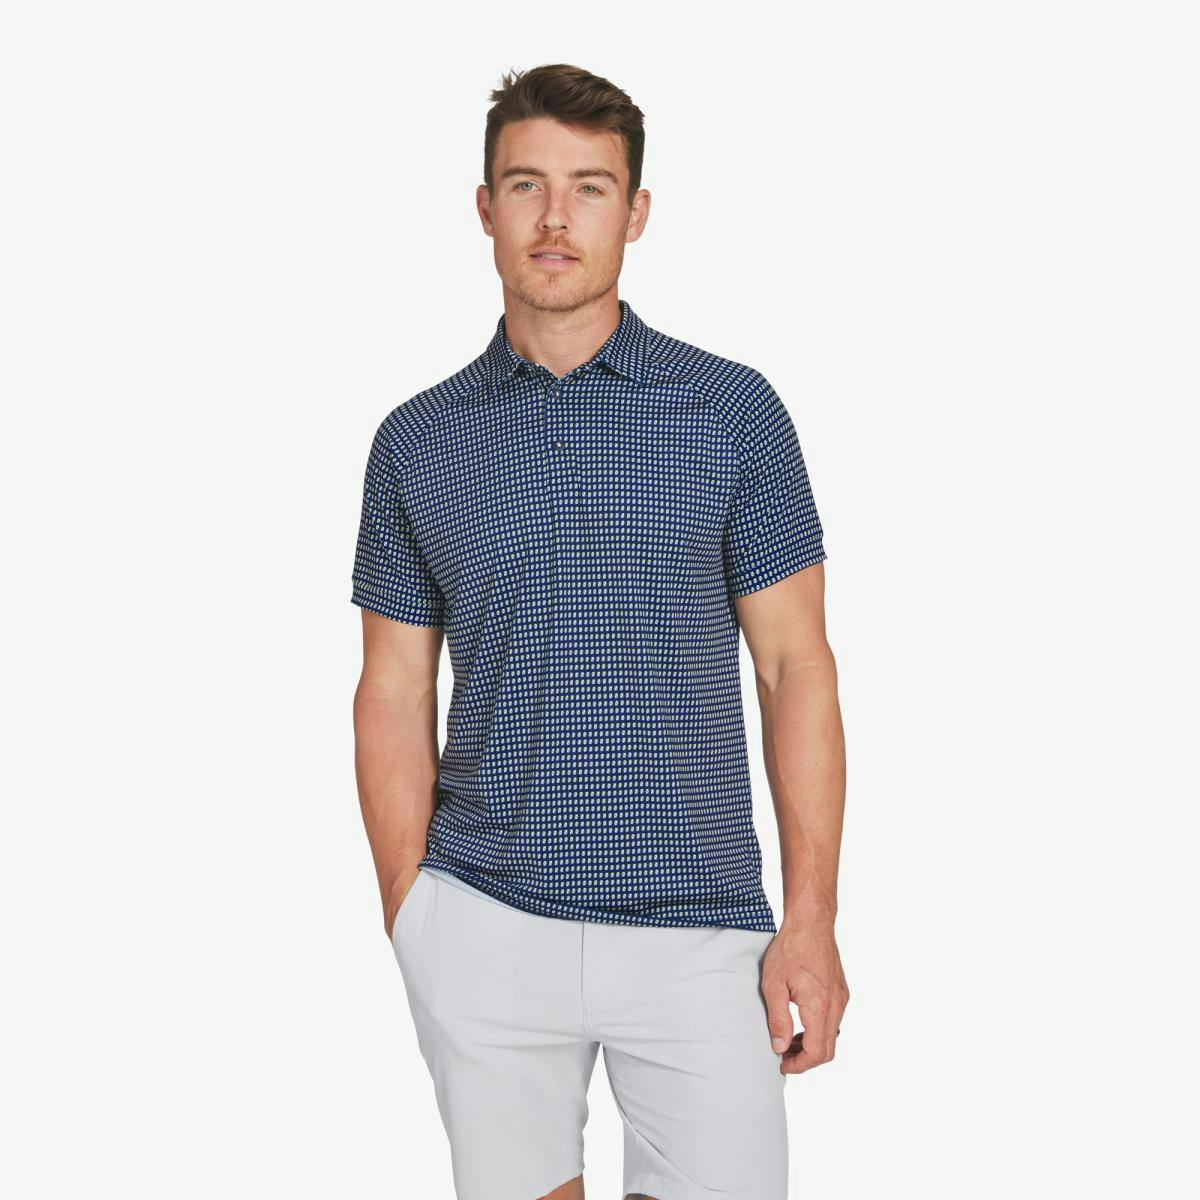 Versa Clubhouse Polo - Product Image 1